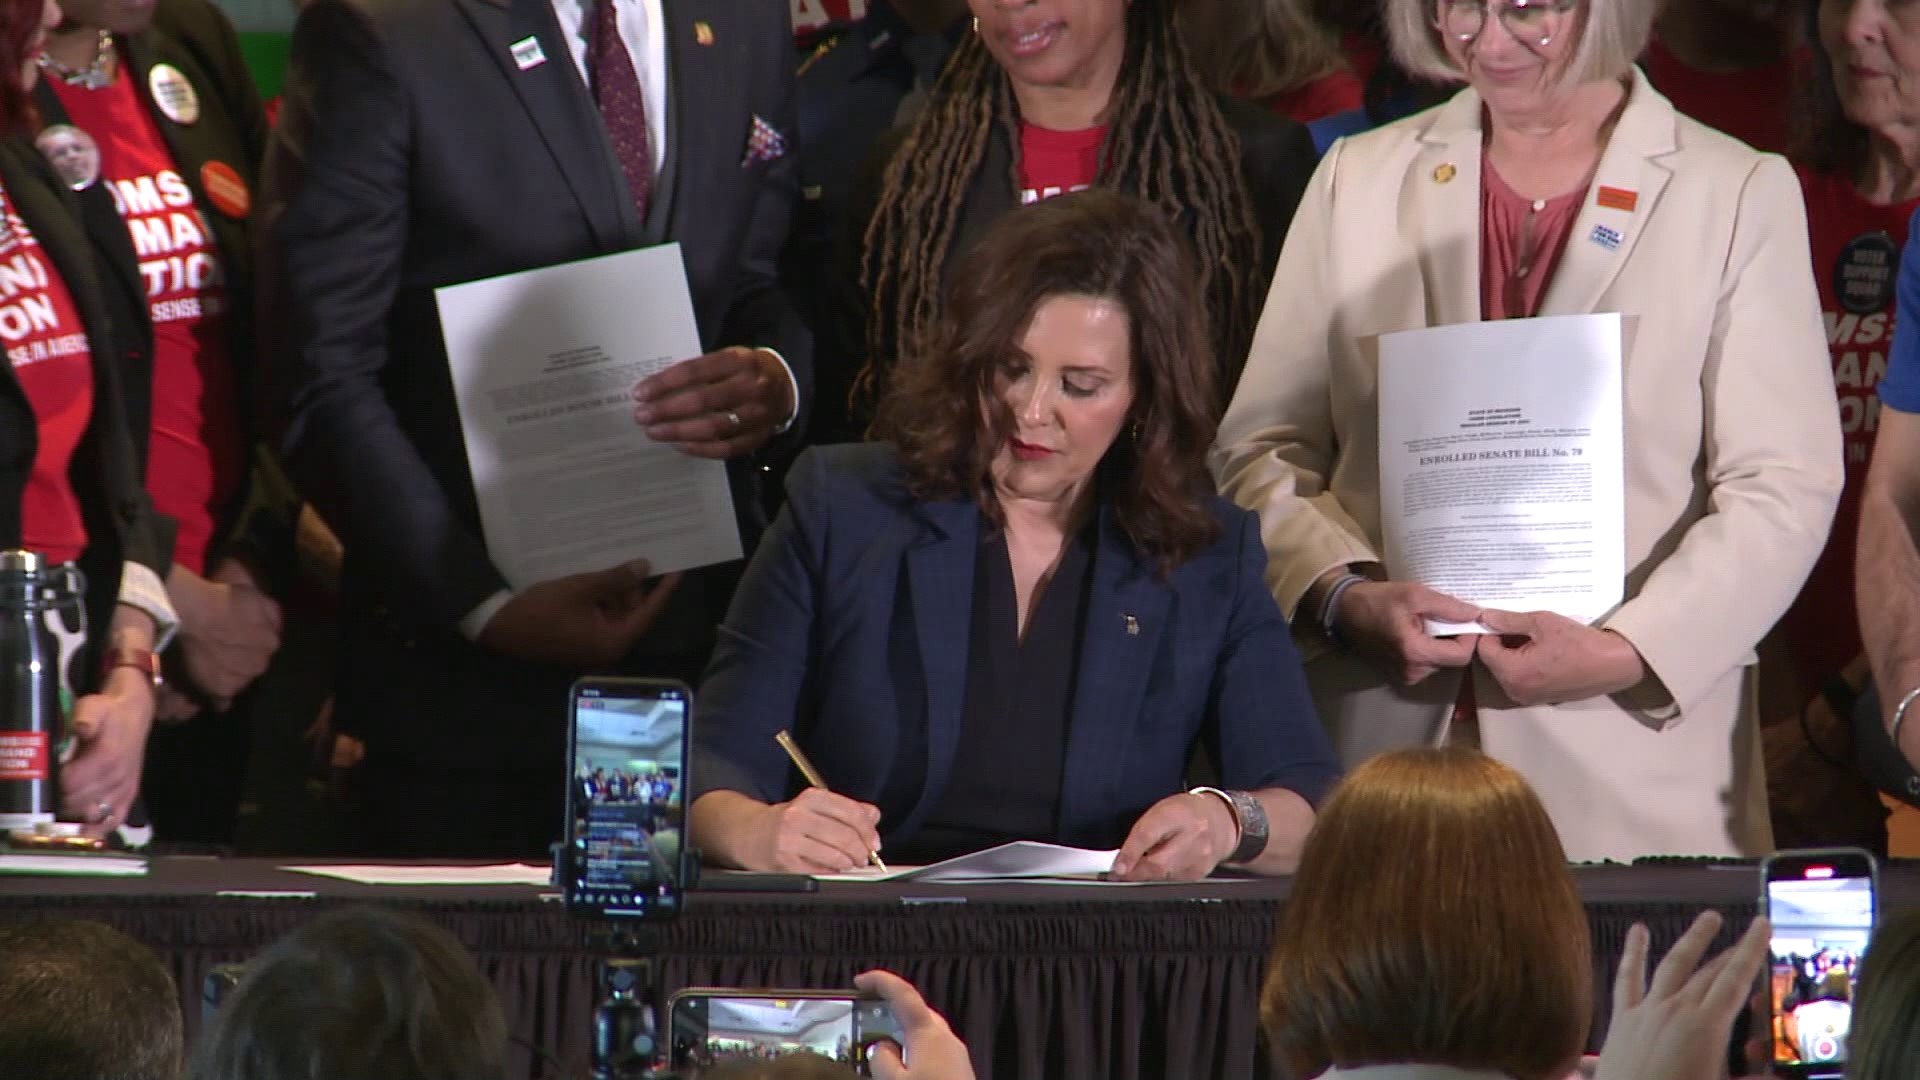 Whitmer signed the bills at Spartan Stadium in East Lansing. This comes exactly two months after the deadly shooting at Michigan State University.